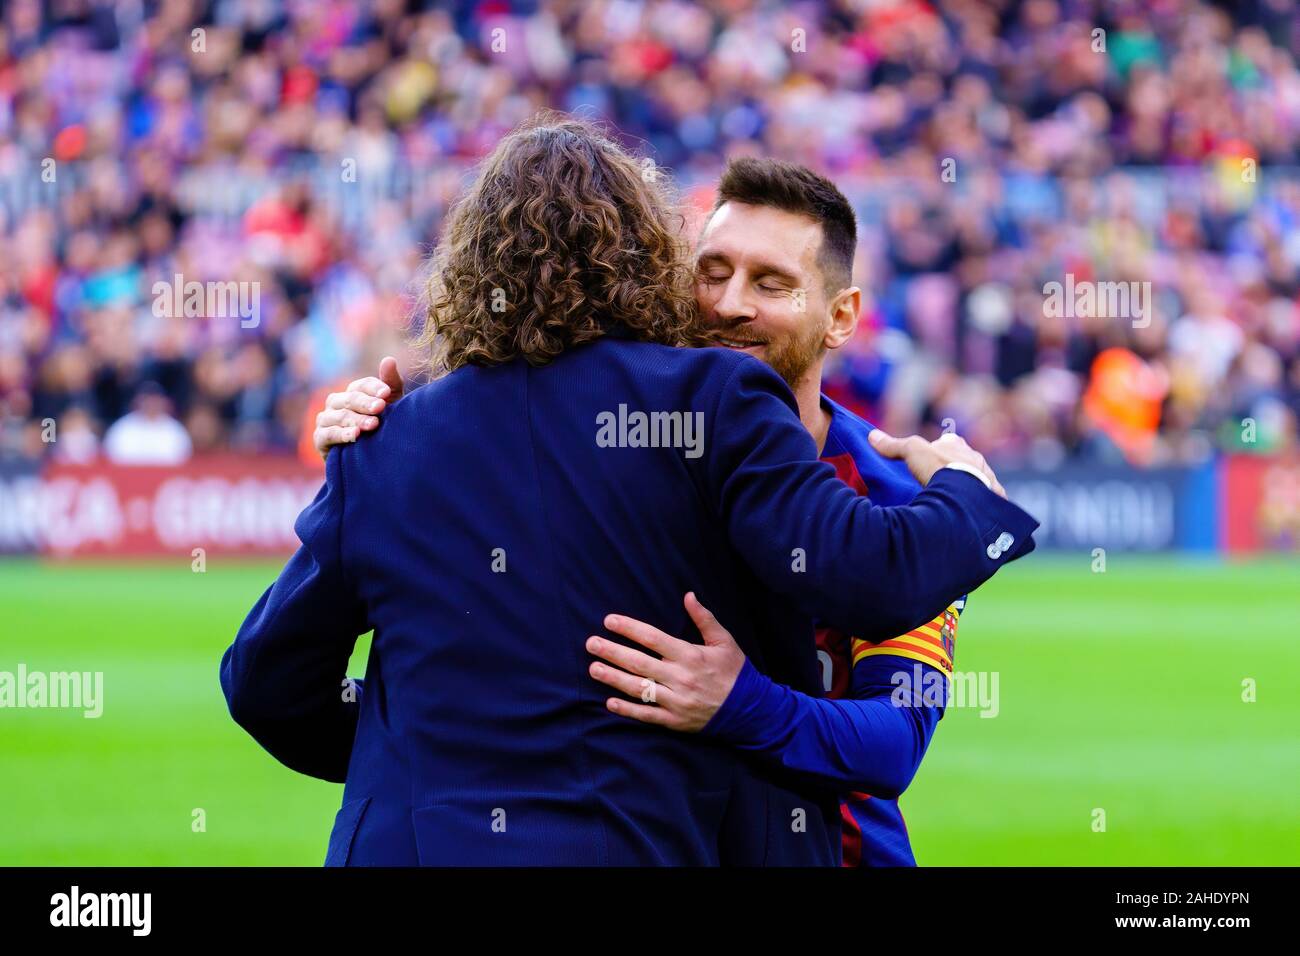 BARCELONA - DEC 21: Carles Puyol (L) and Messi (R) prior to the La Liga match between FC Barcelona and Deportivo Alaves at the Camp Nou Stadium on Dec Stock Photo